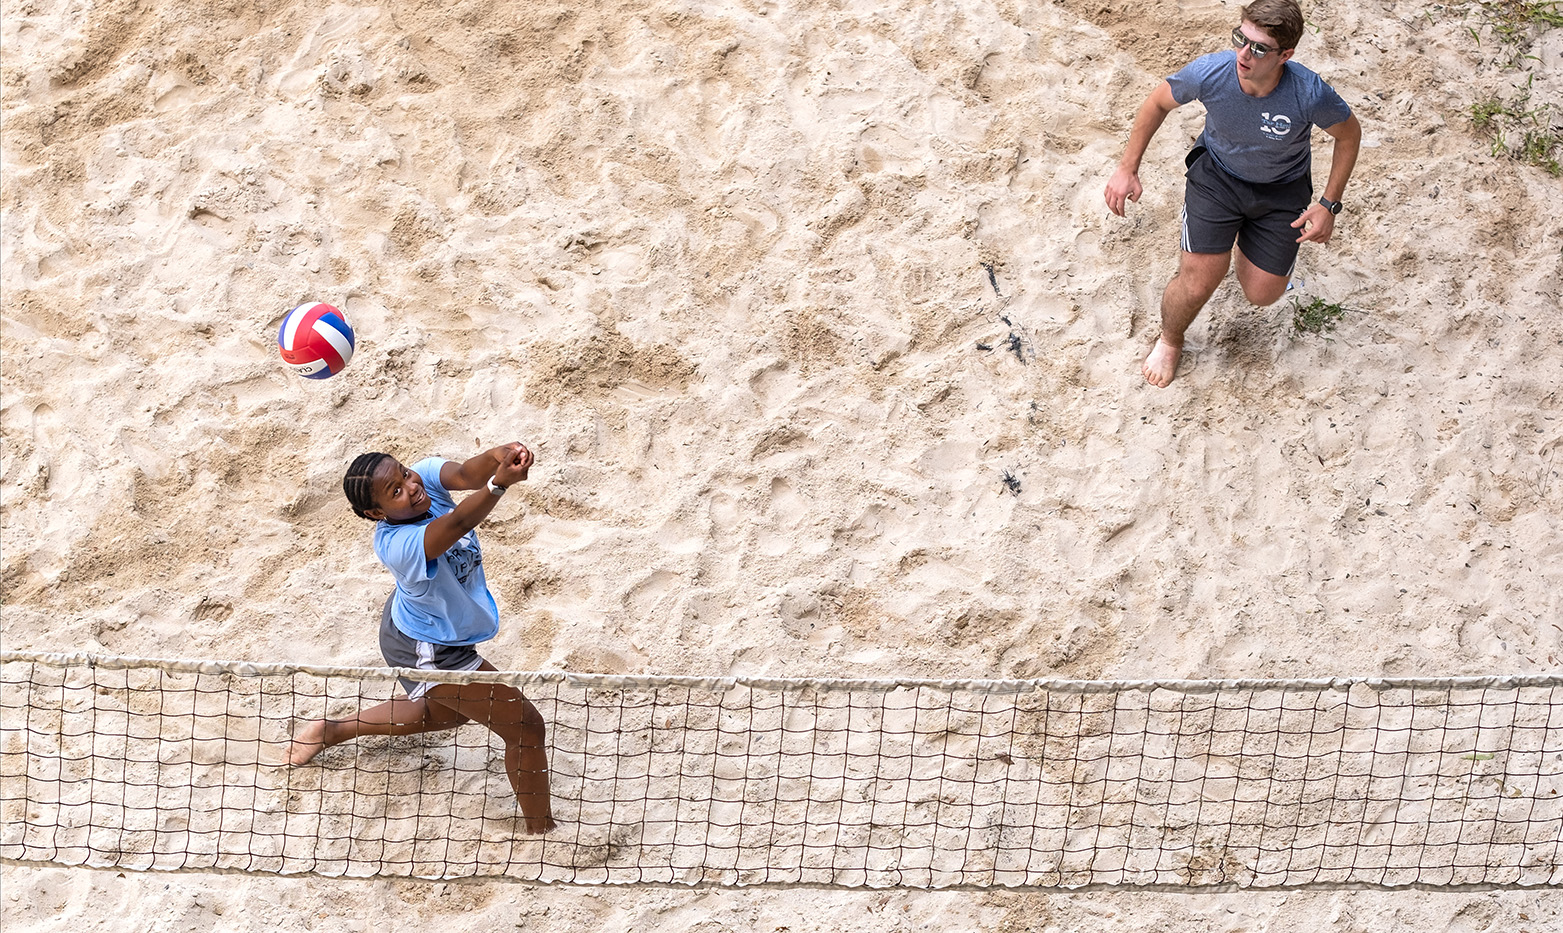 Aerial image of two students playing beach volleyball.